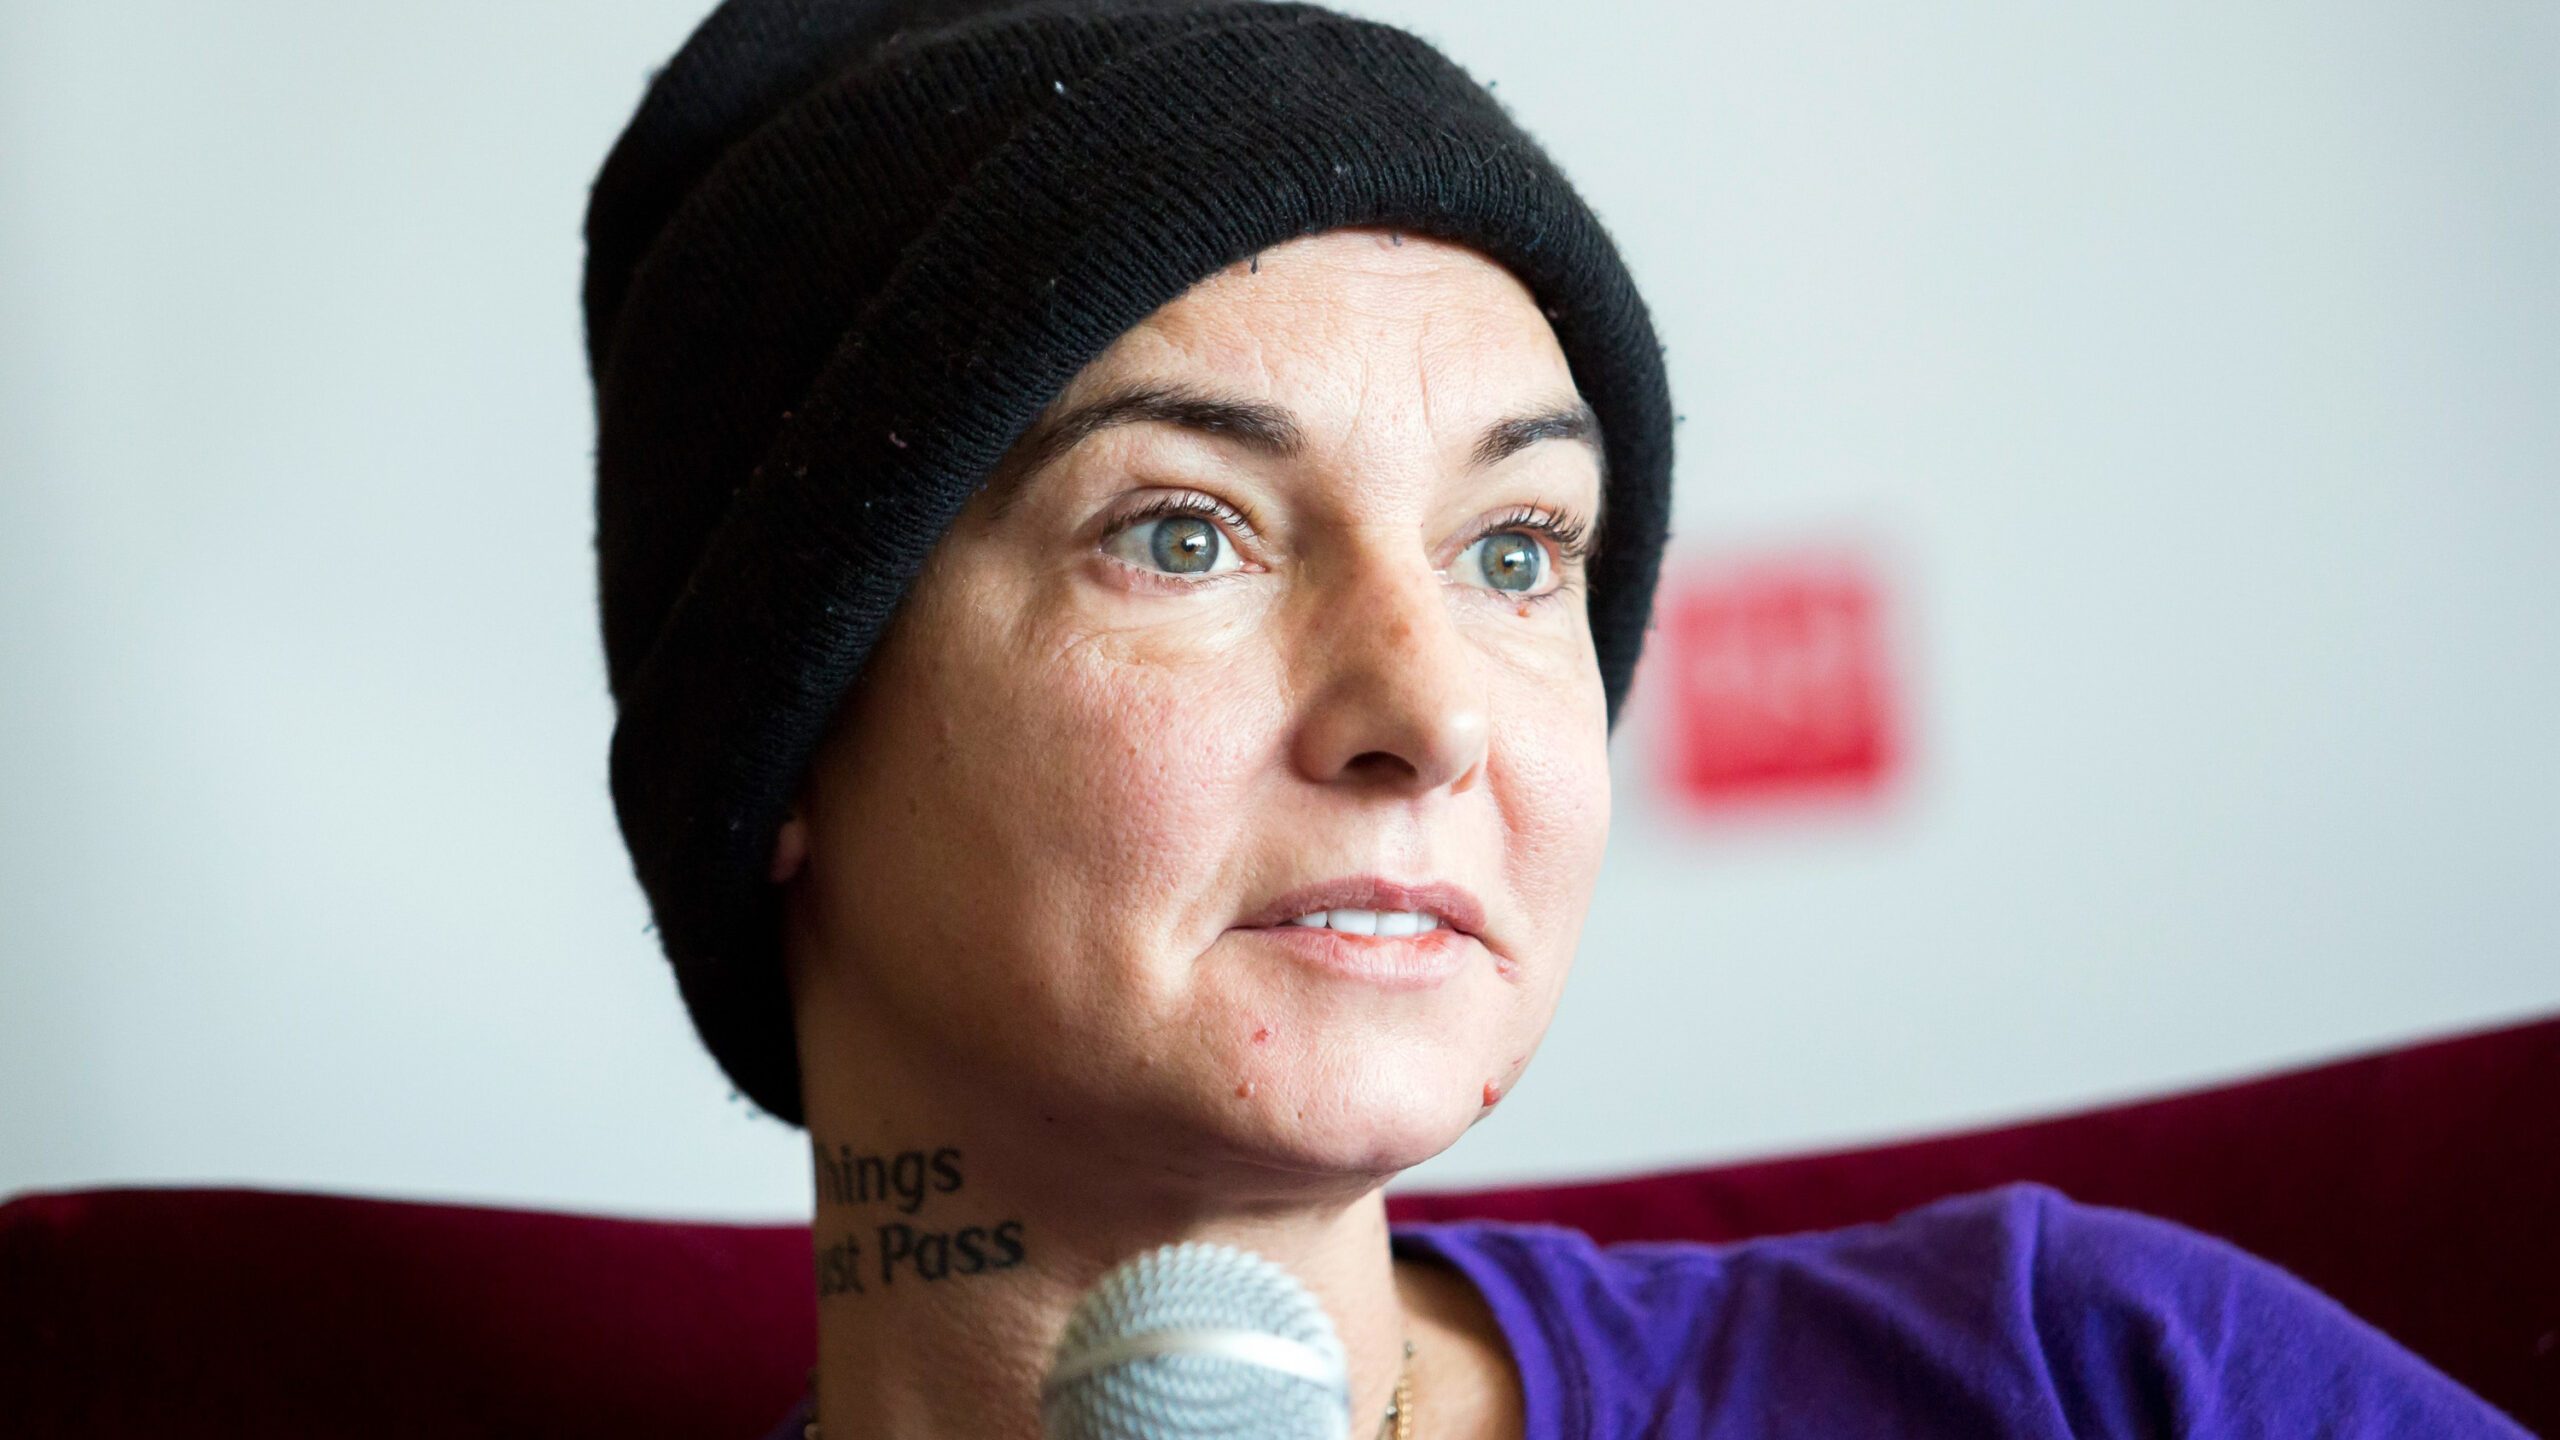 Sinead O’Connor found safe near Chicago after scare